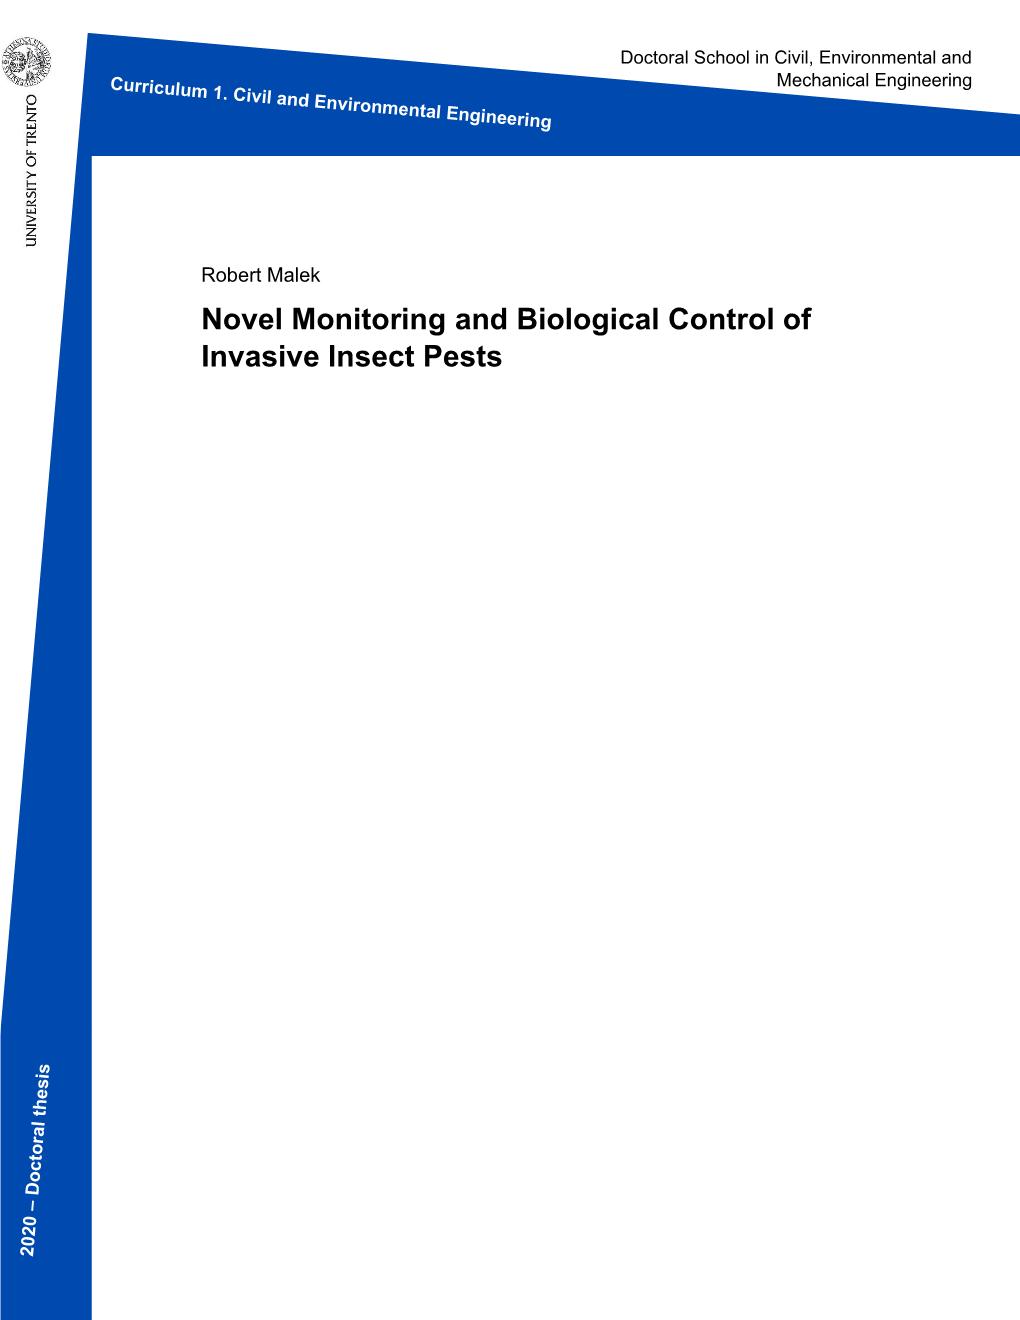 Novel Monitoring and Biological Control of Invasive Insect Pests